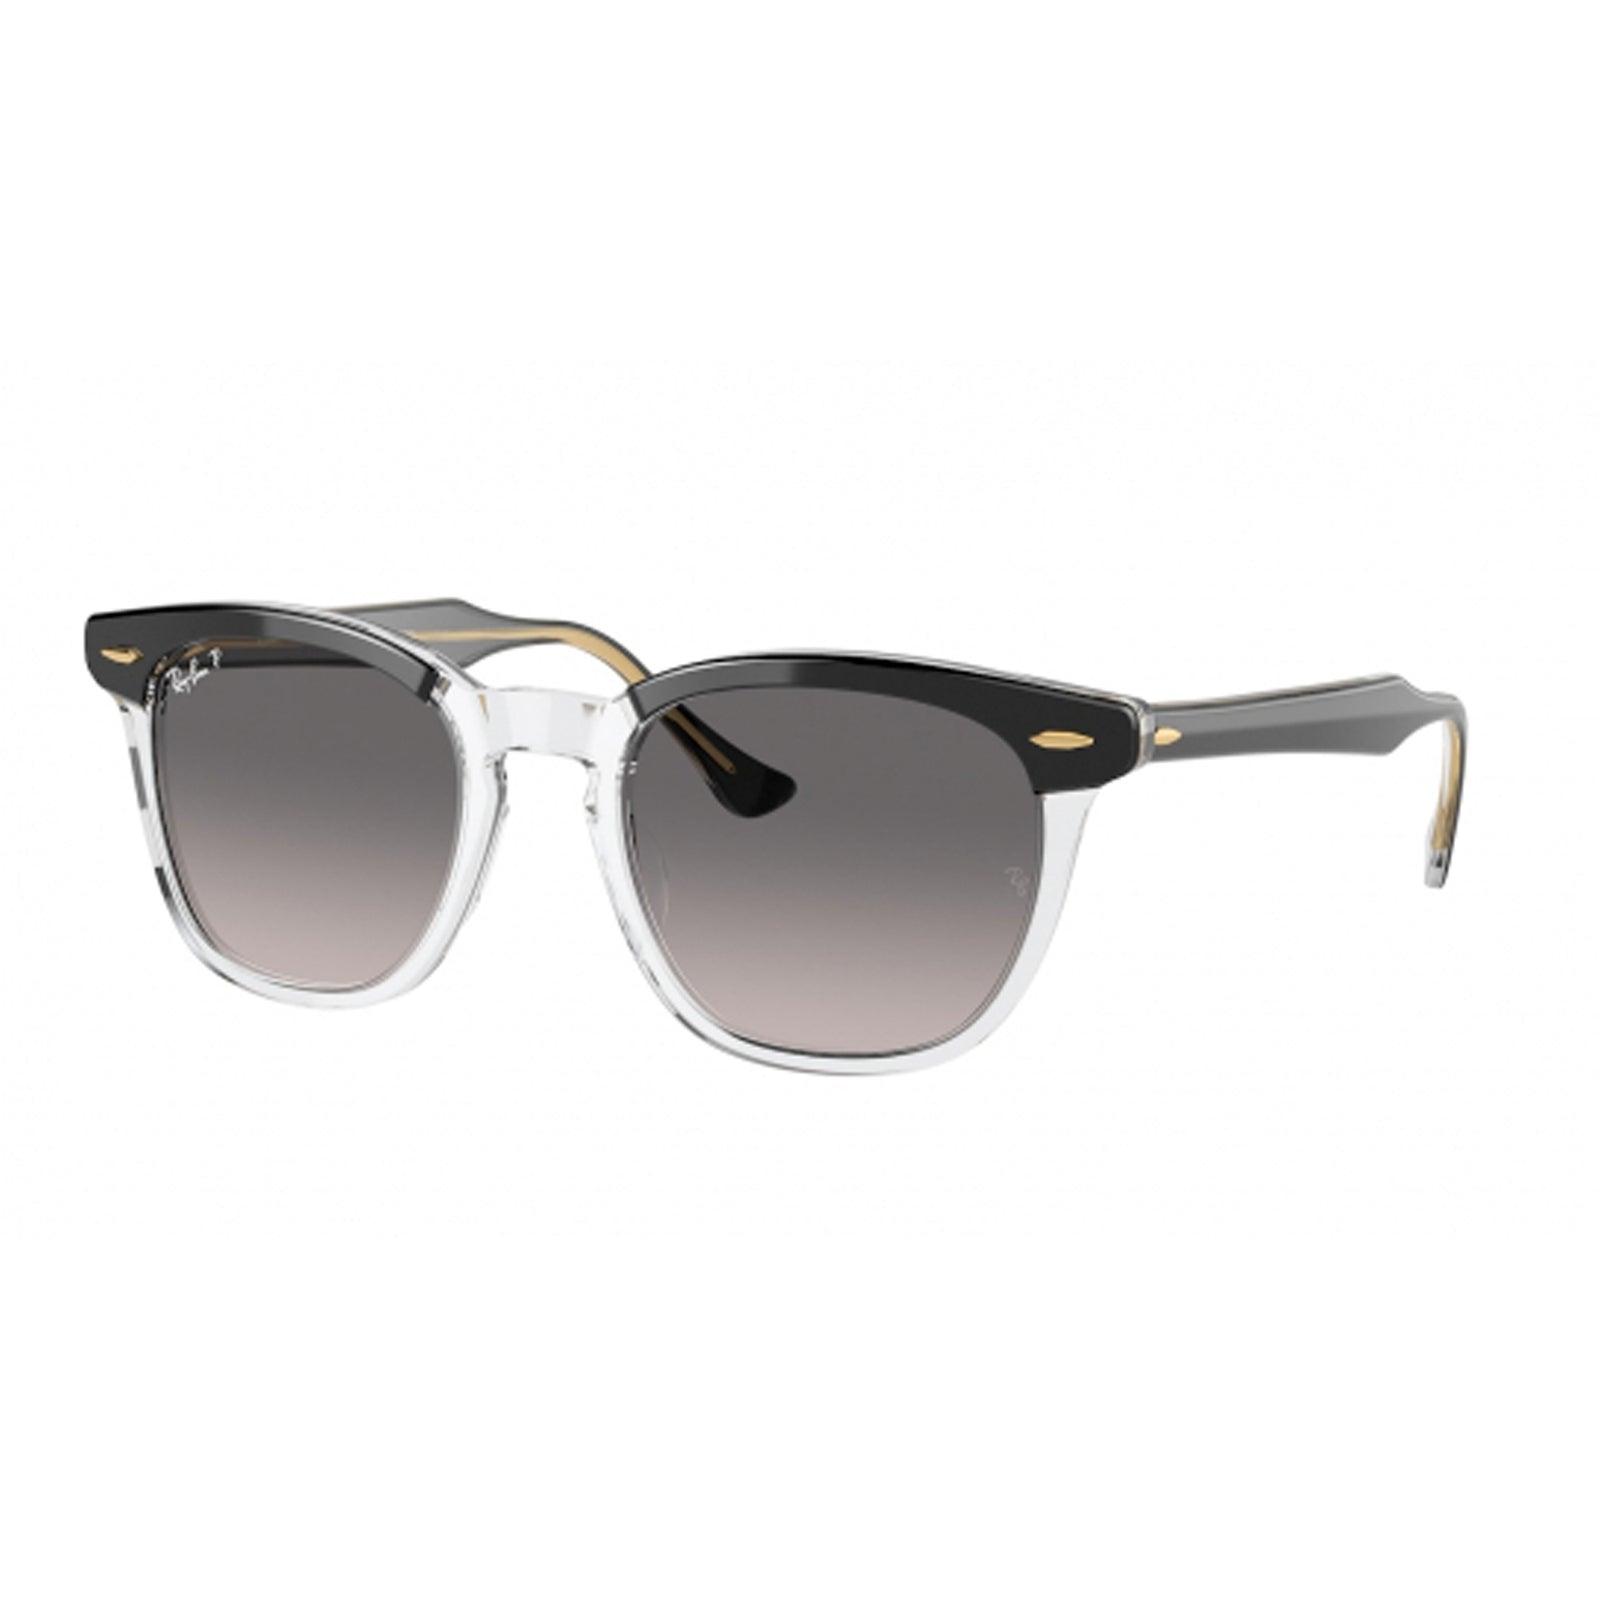 Ray-Ban Sunglasses - Surf Station Store